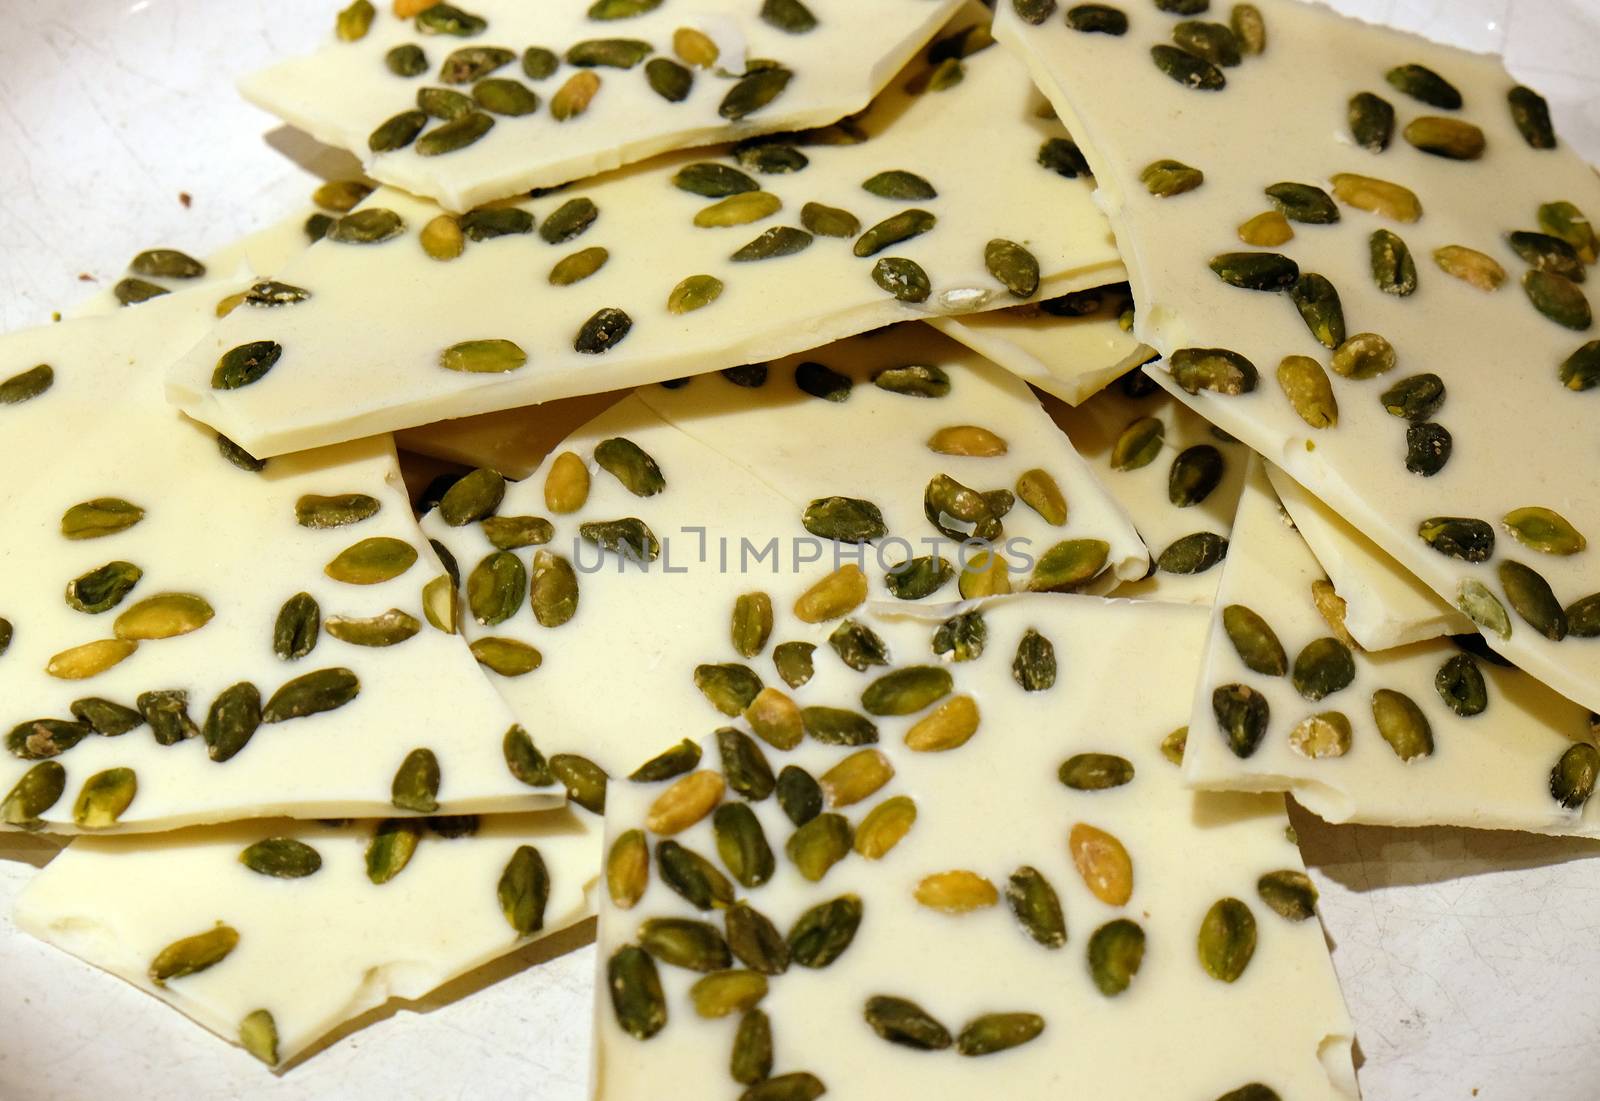 Homemade white chocolate with pistachios